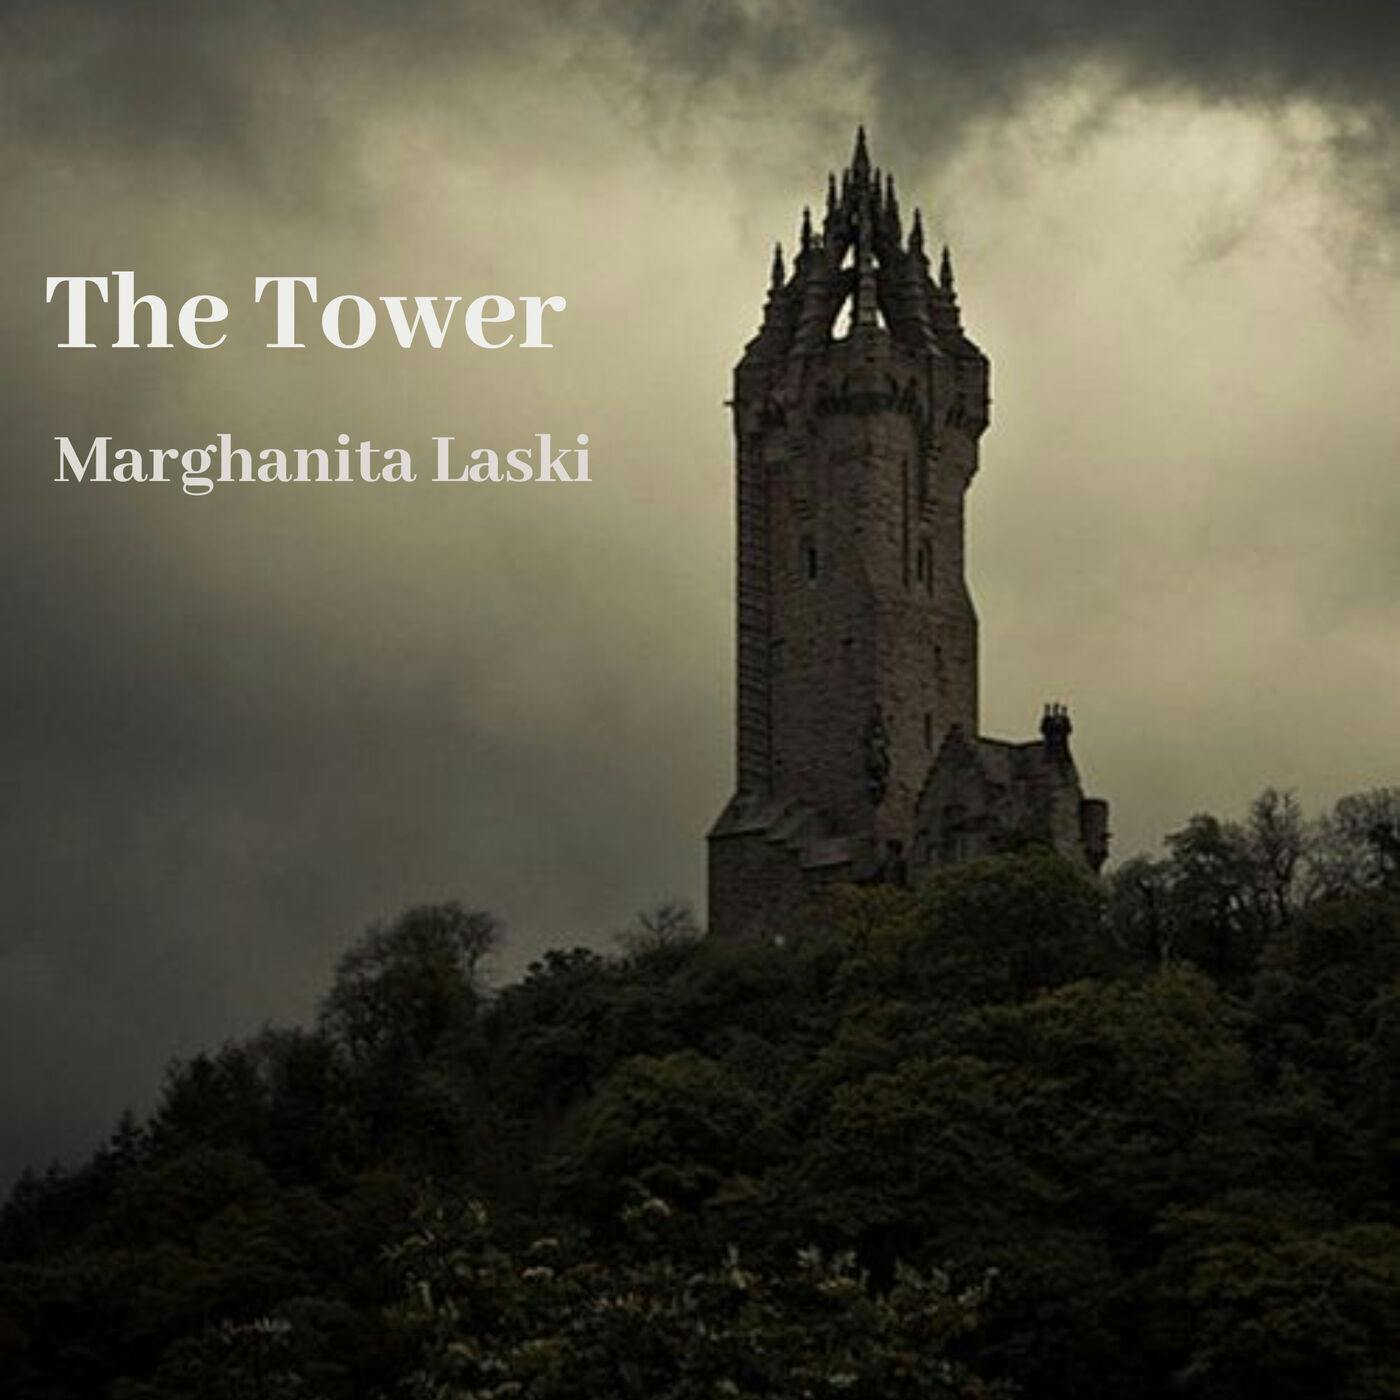 Episode 13 (unlucky for some): The Tower by Marghatina Laski